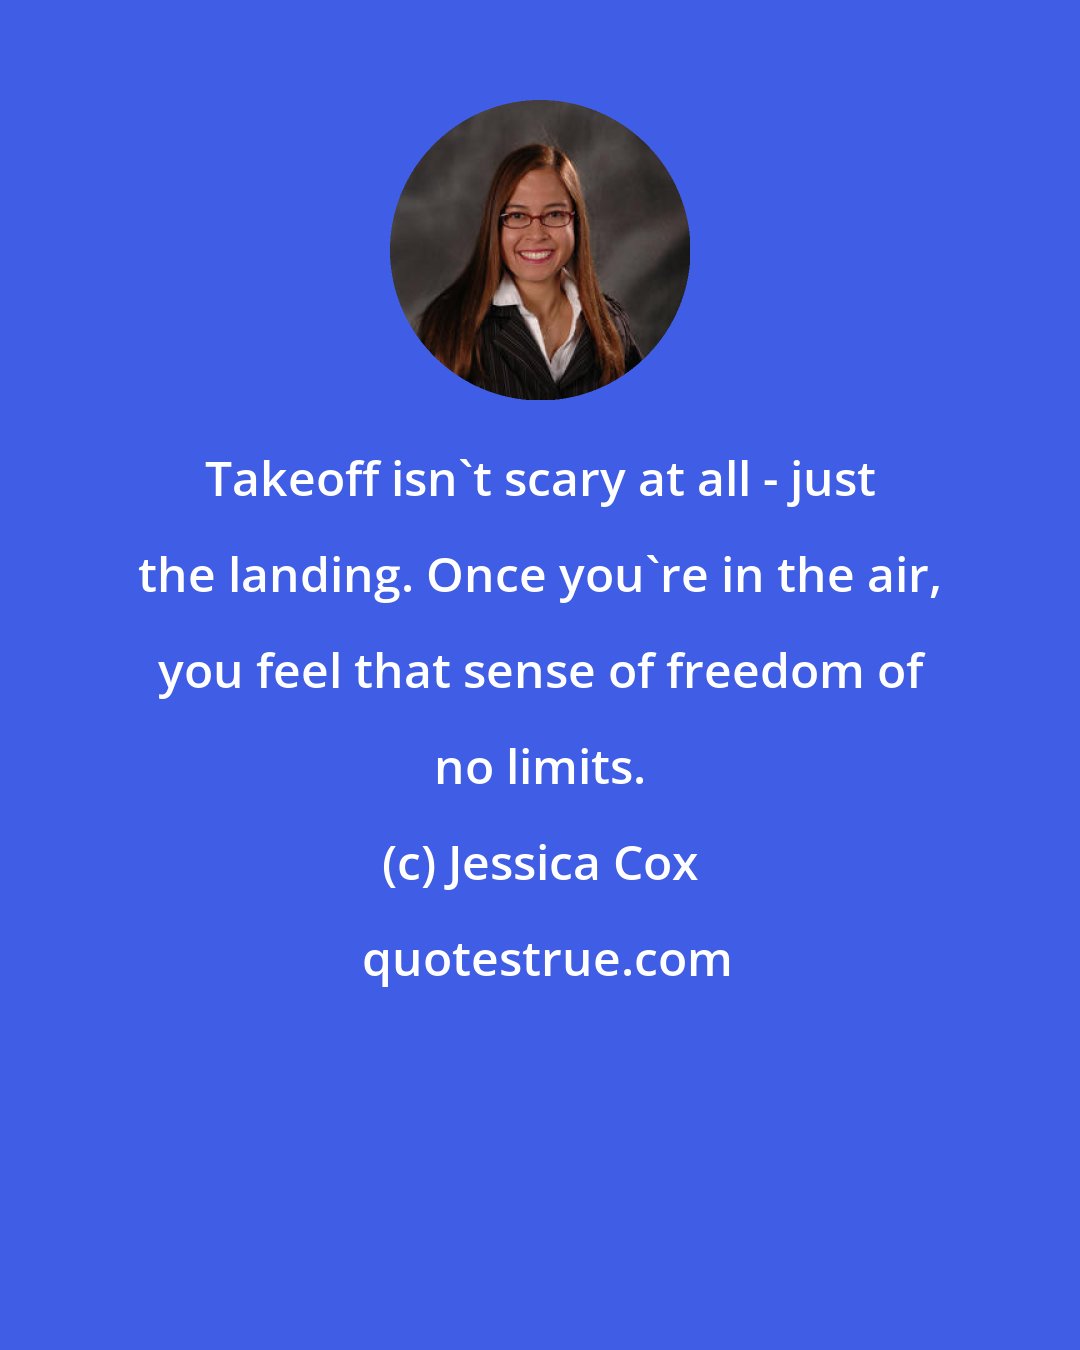 Jessica Cox: Takeoff isn't scary at all - just the landing. Once you're in the air, you feel that sense of freedom of no limits.